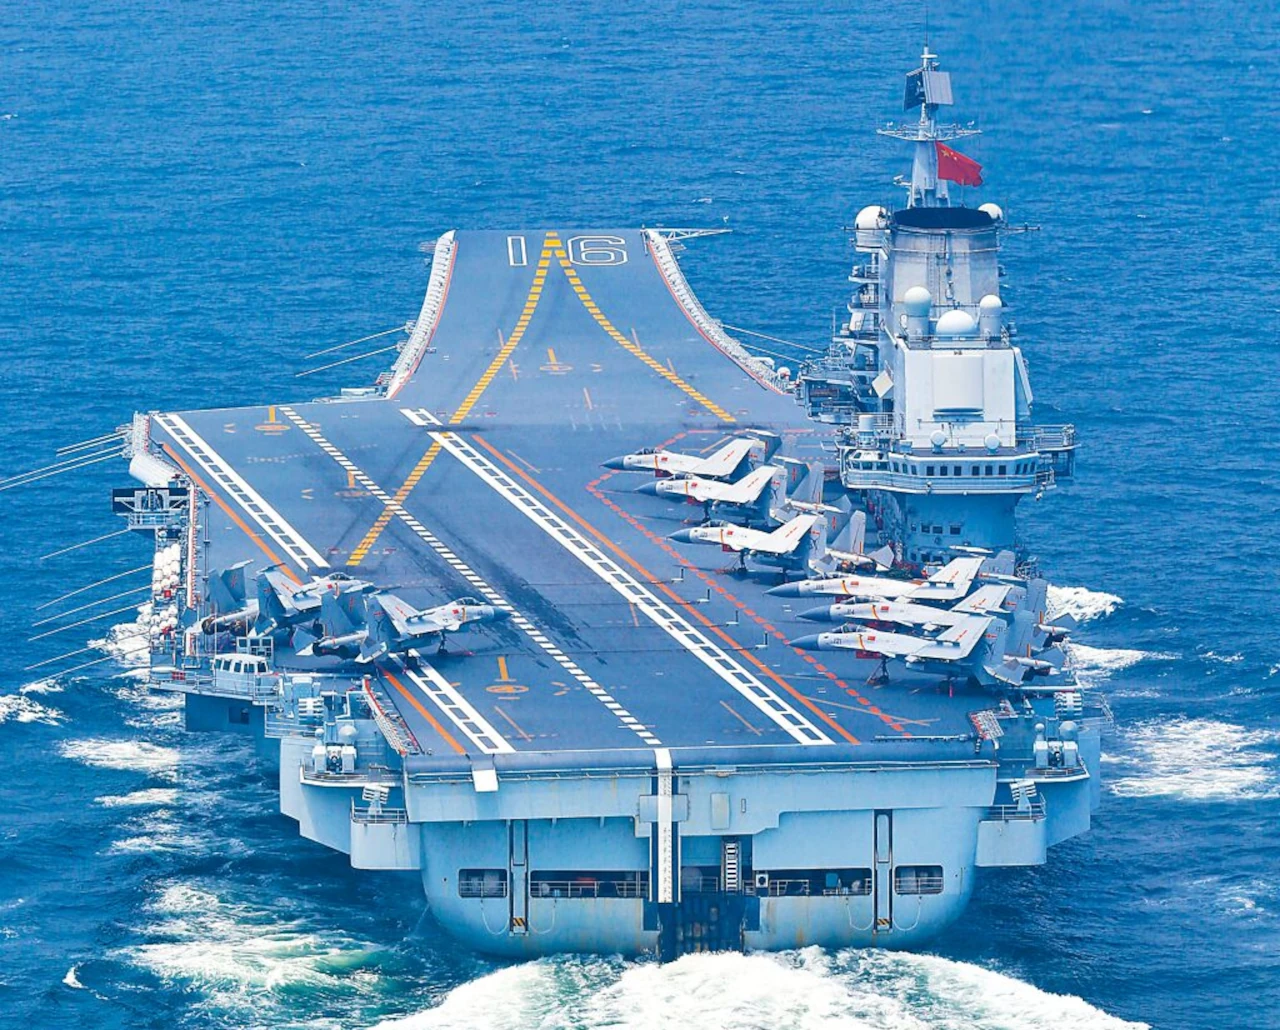 Liaoning aircraft carrier